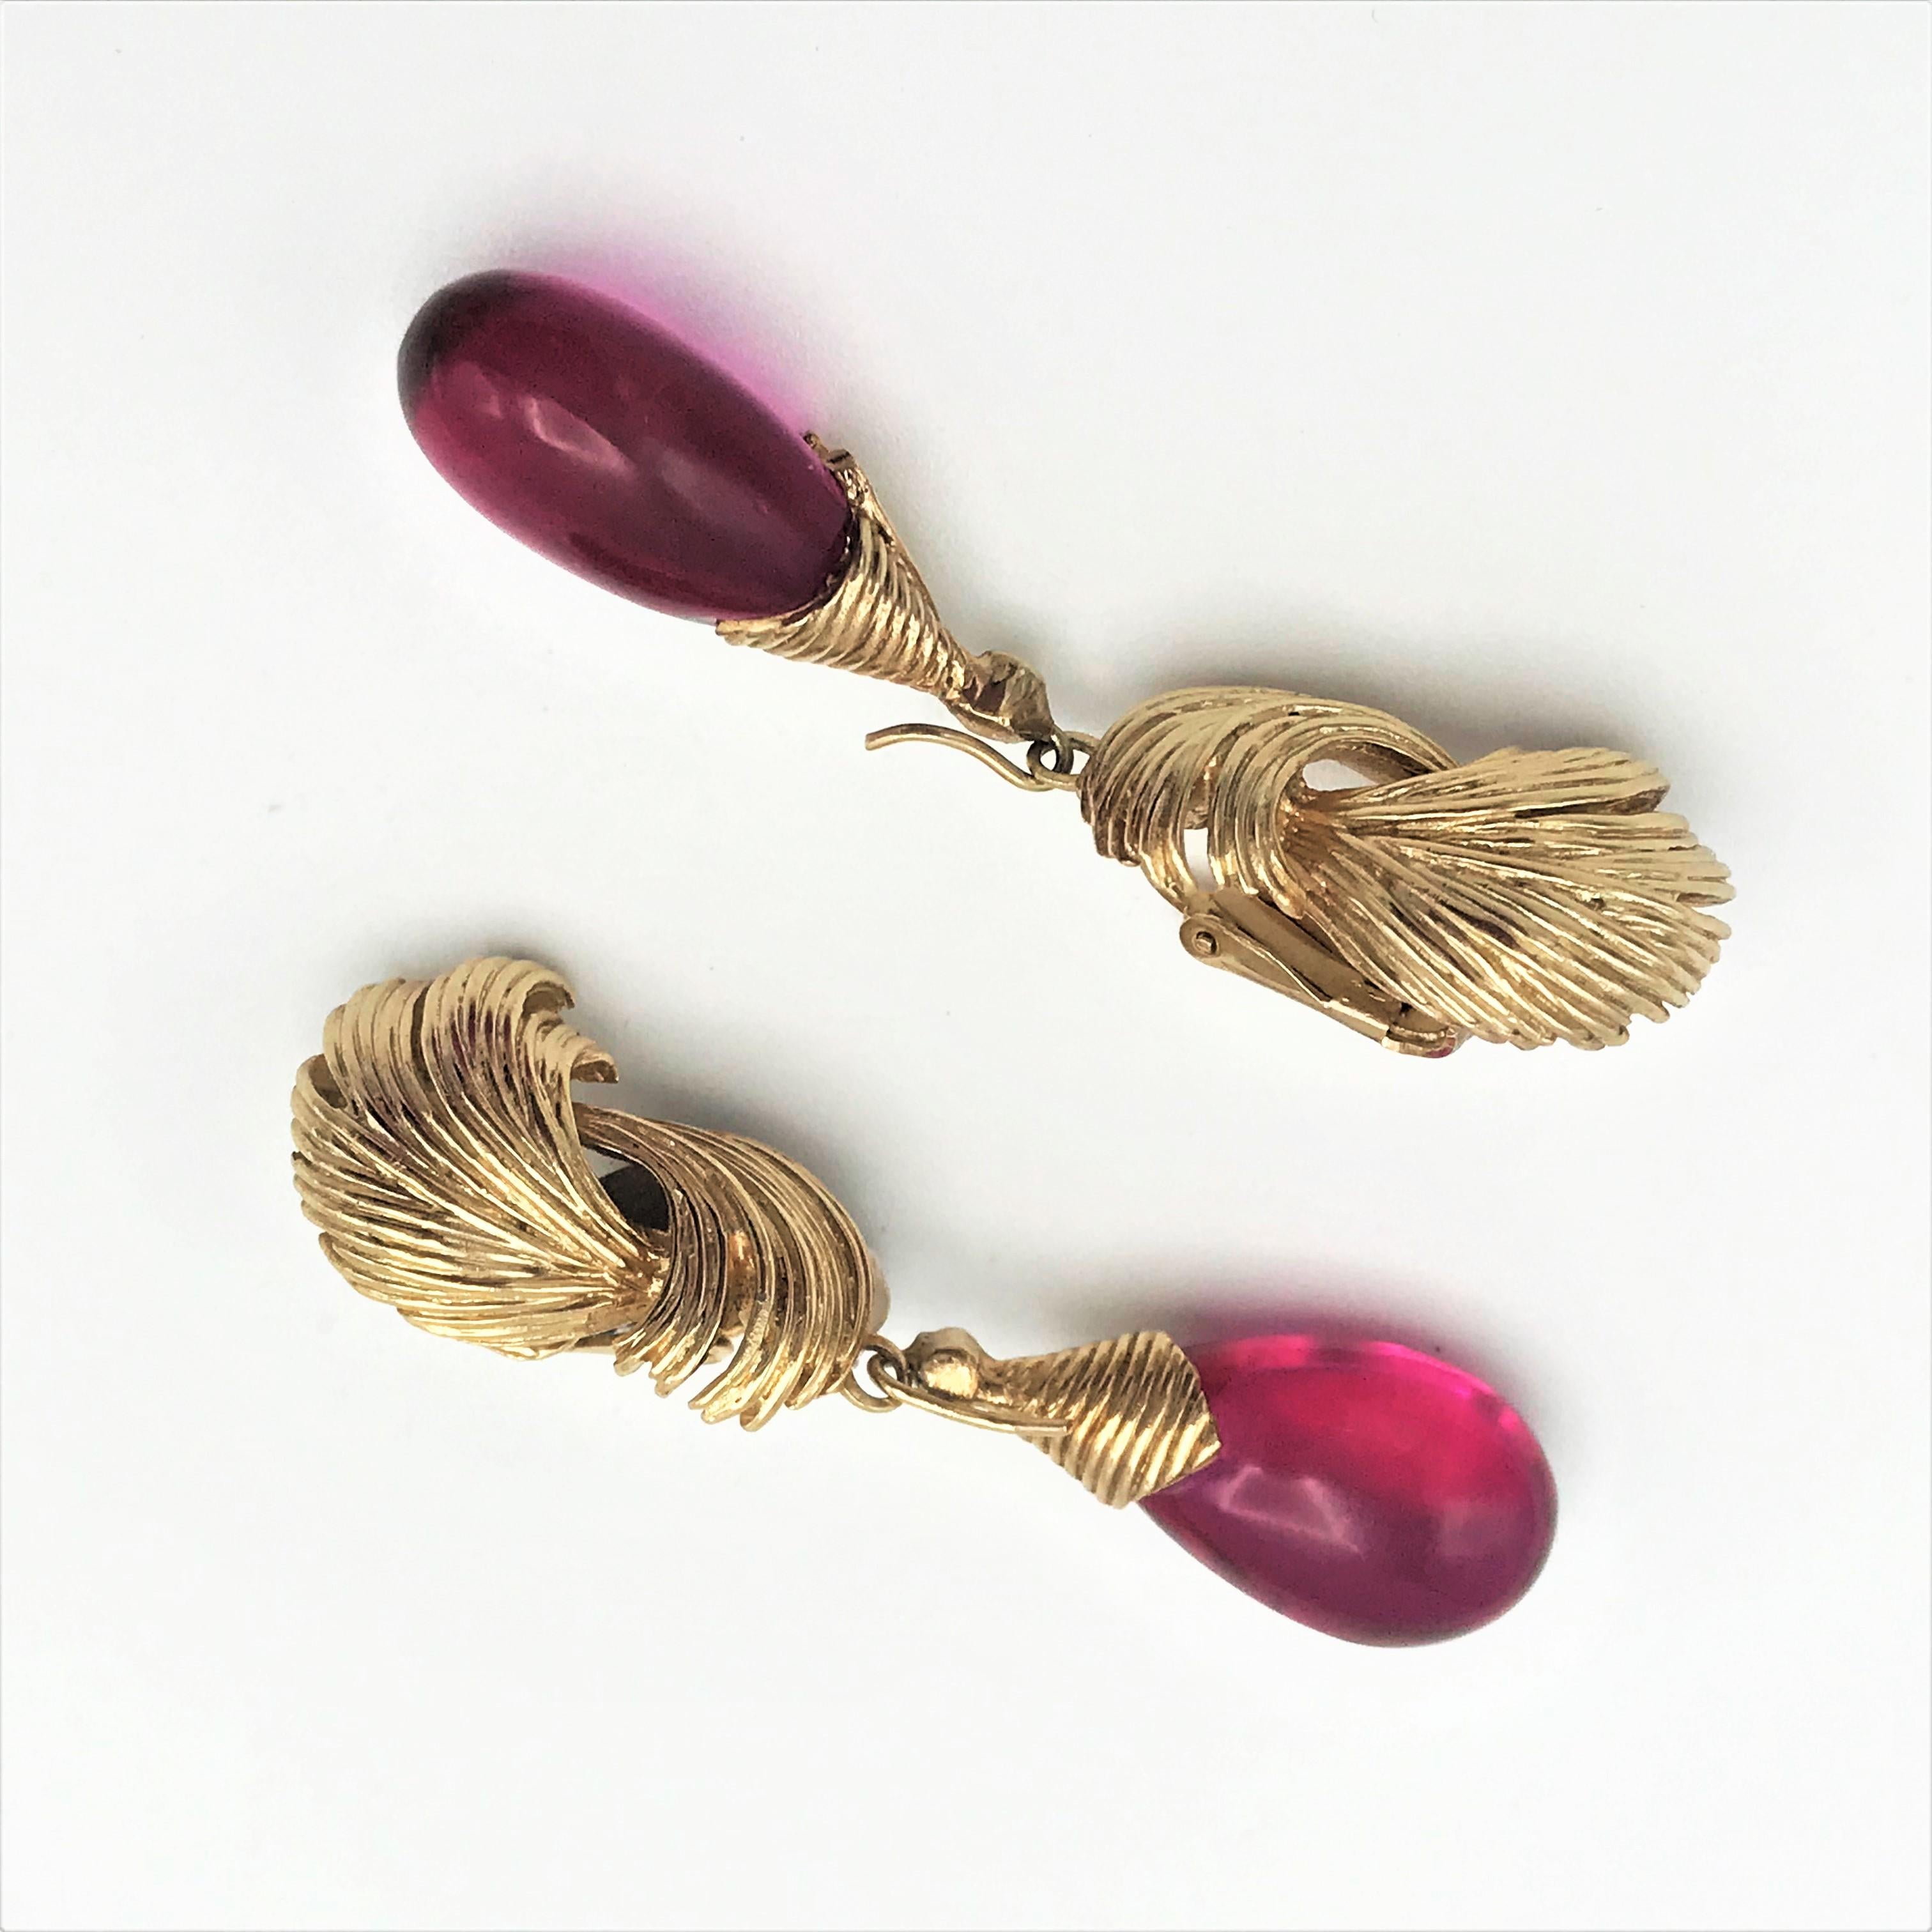 Ear clips with detachable red tropics. Wearable only the upper golden part or with the movable red glass drop.
Measurement: Full length 5 cm/1,96